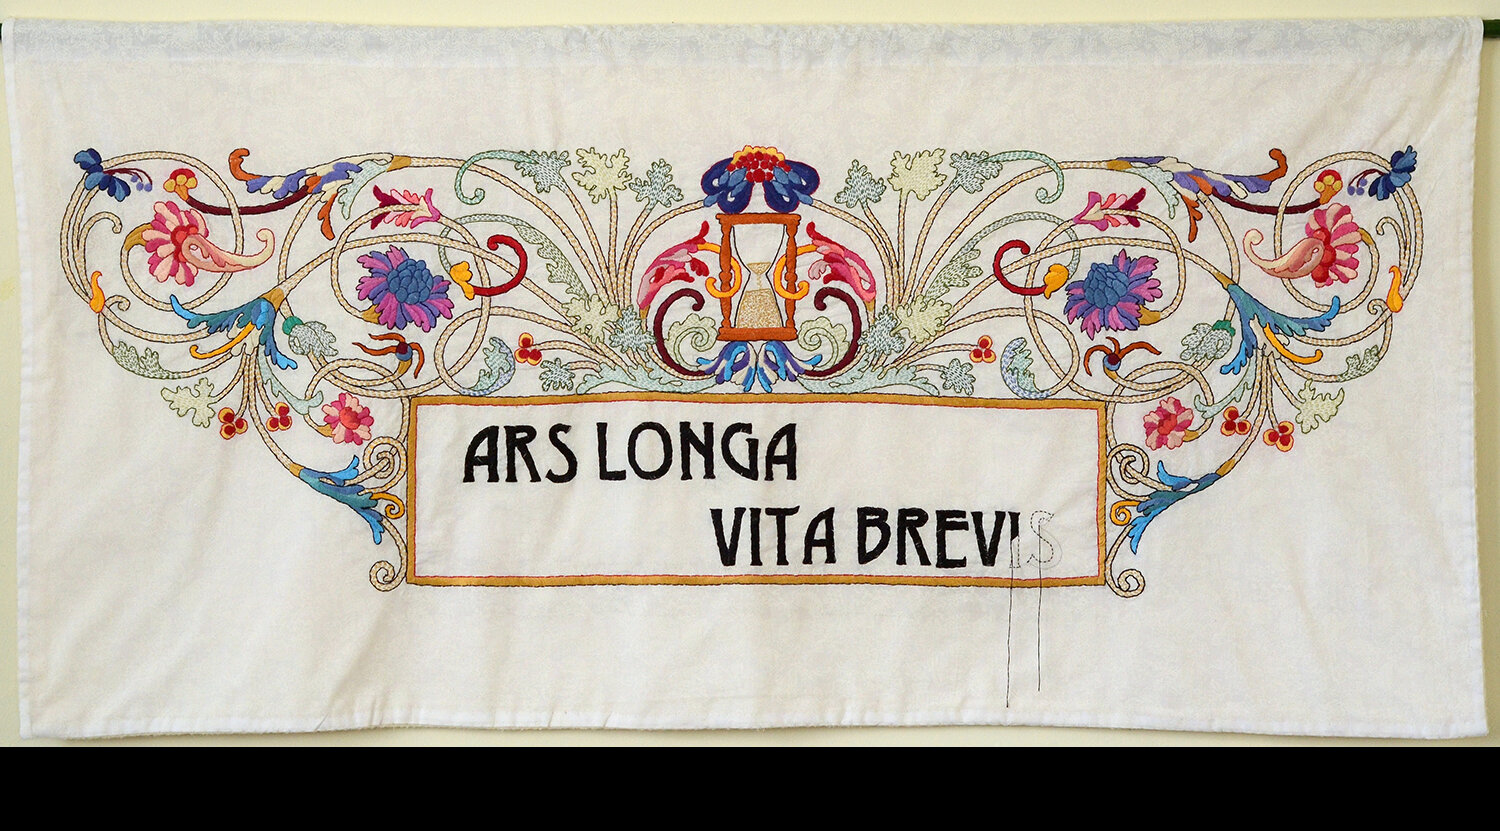   Mary M. Mazziotti , from the series  Ars Longa, Vita Brevis: Hourglass , 2015, hand-embroidery on textile, 24” x 51” 